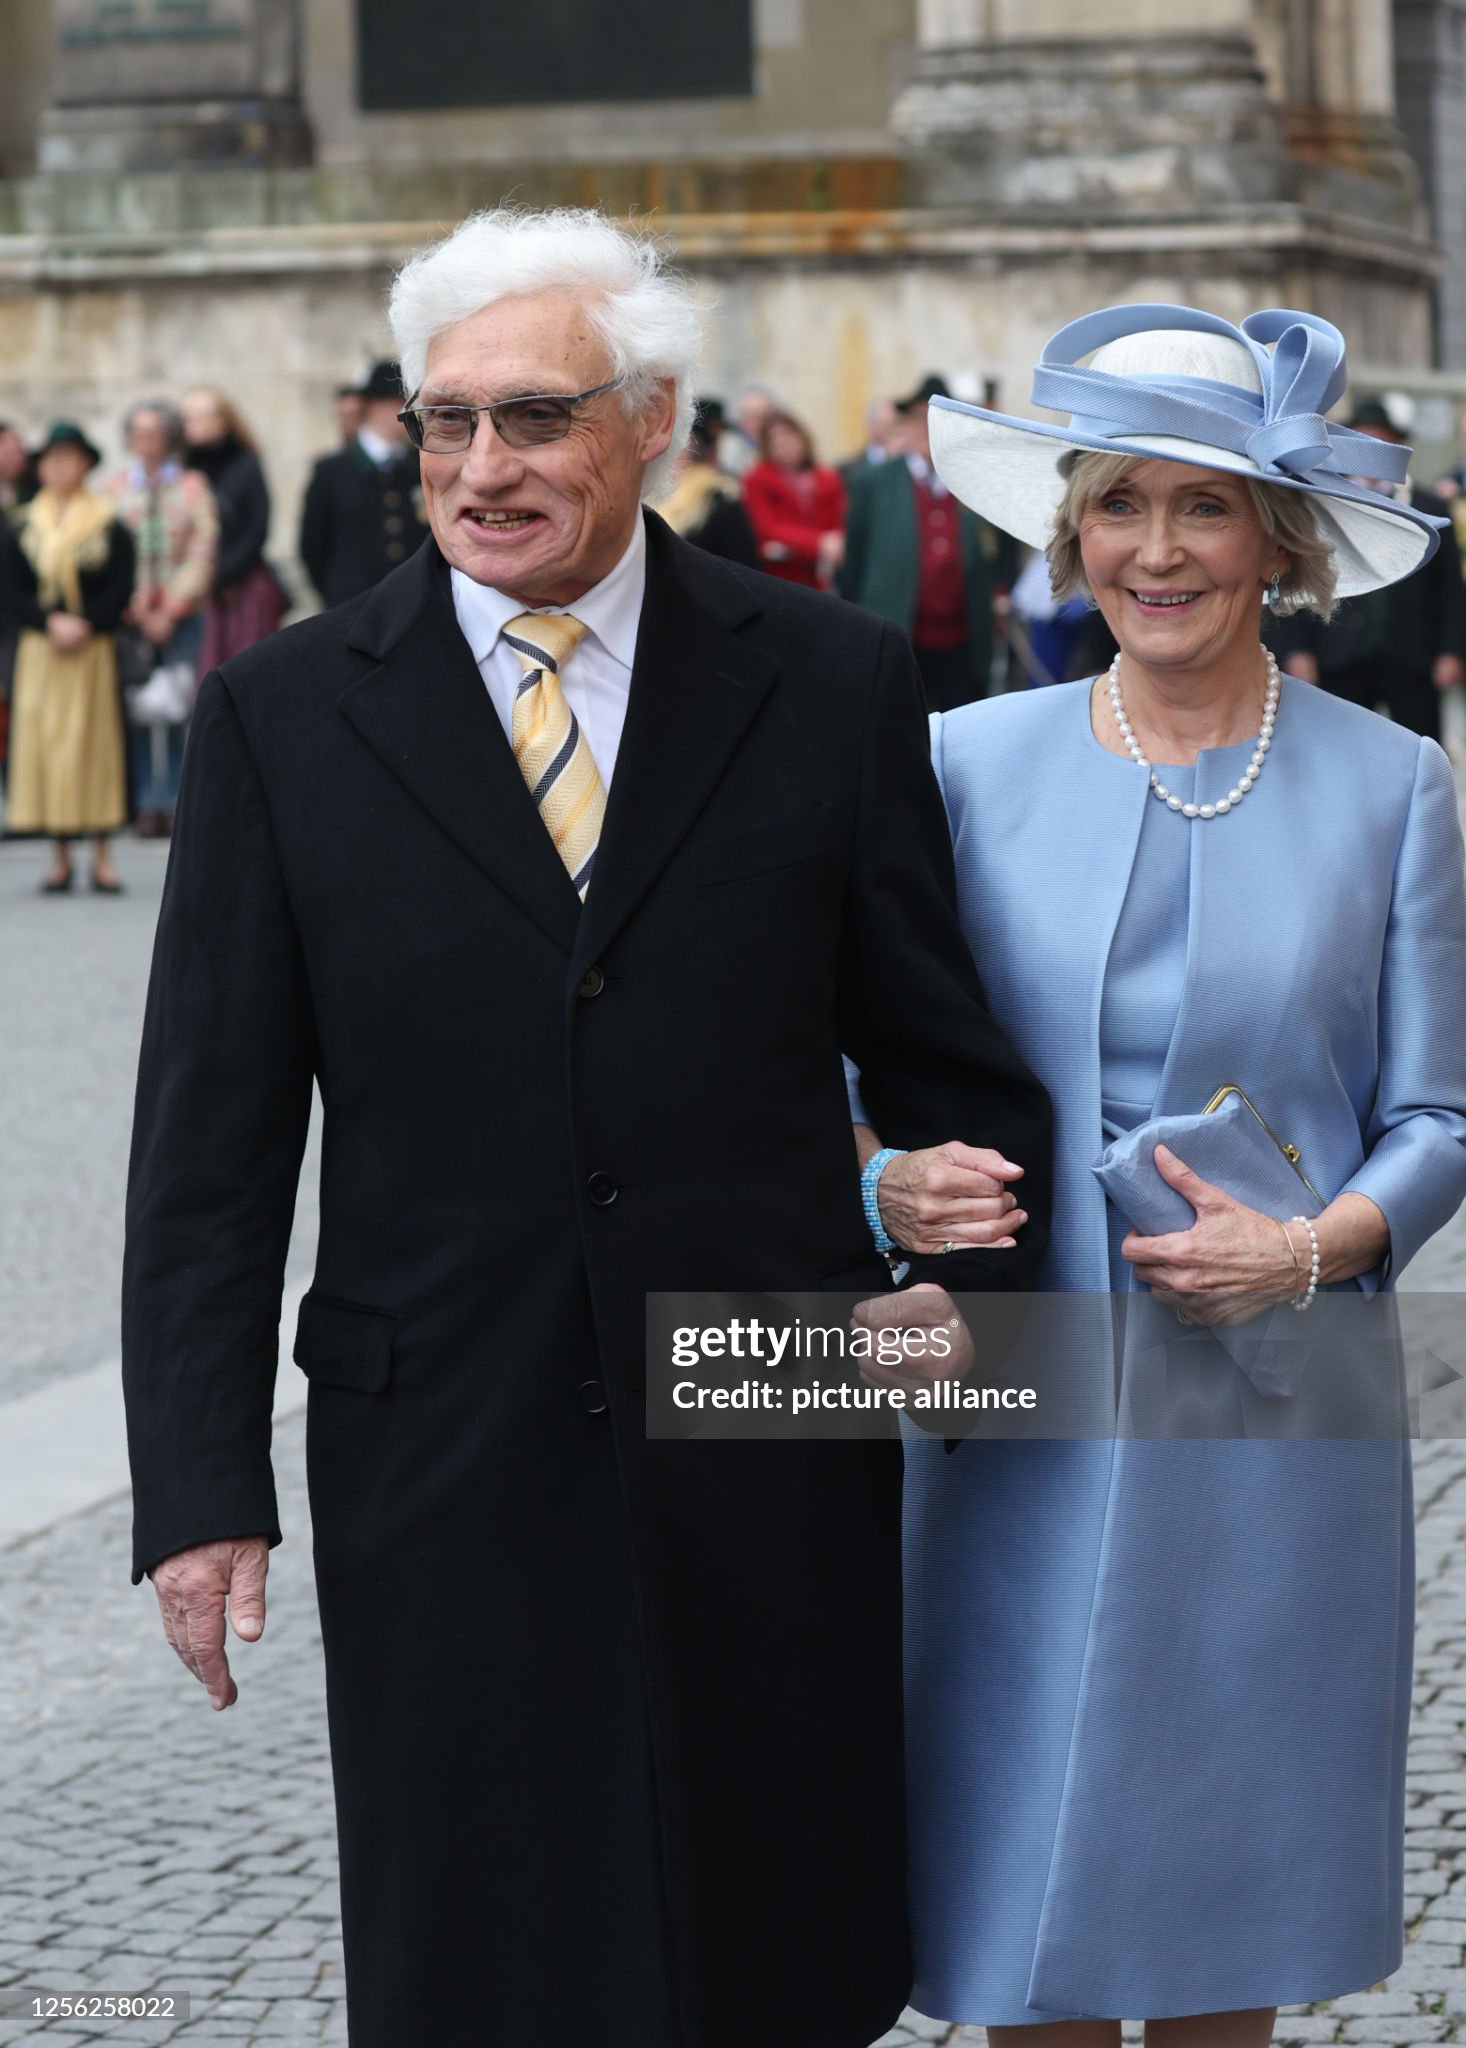 20-may-2023-bavaria-munich-luitpold-prince-of-bavaria-father-of-the-groom-and-veronica-taylor.jpg